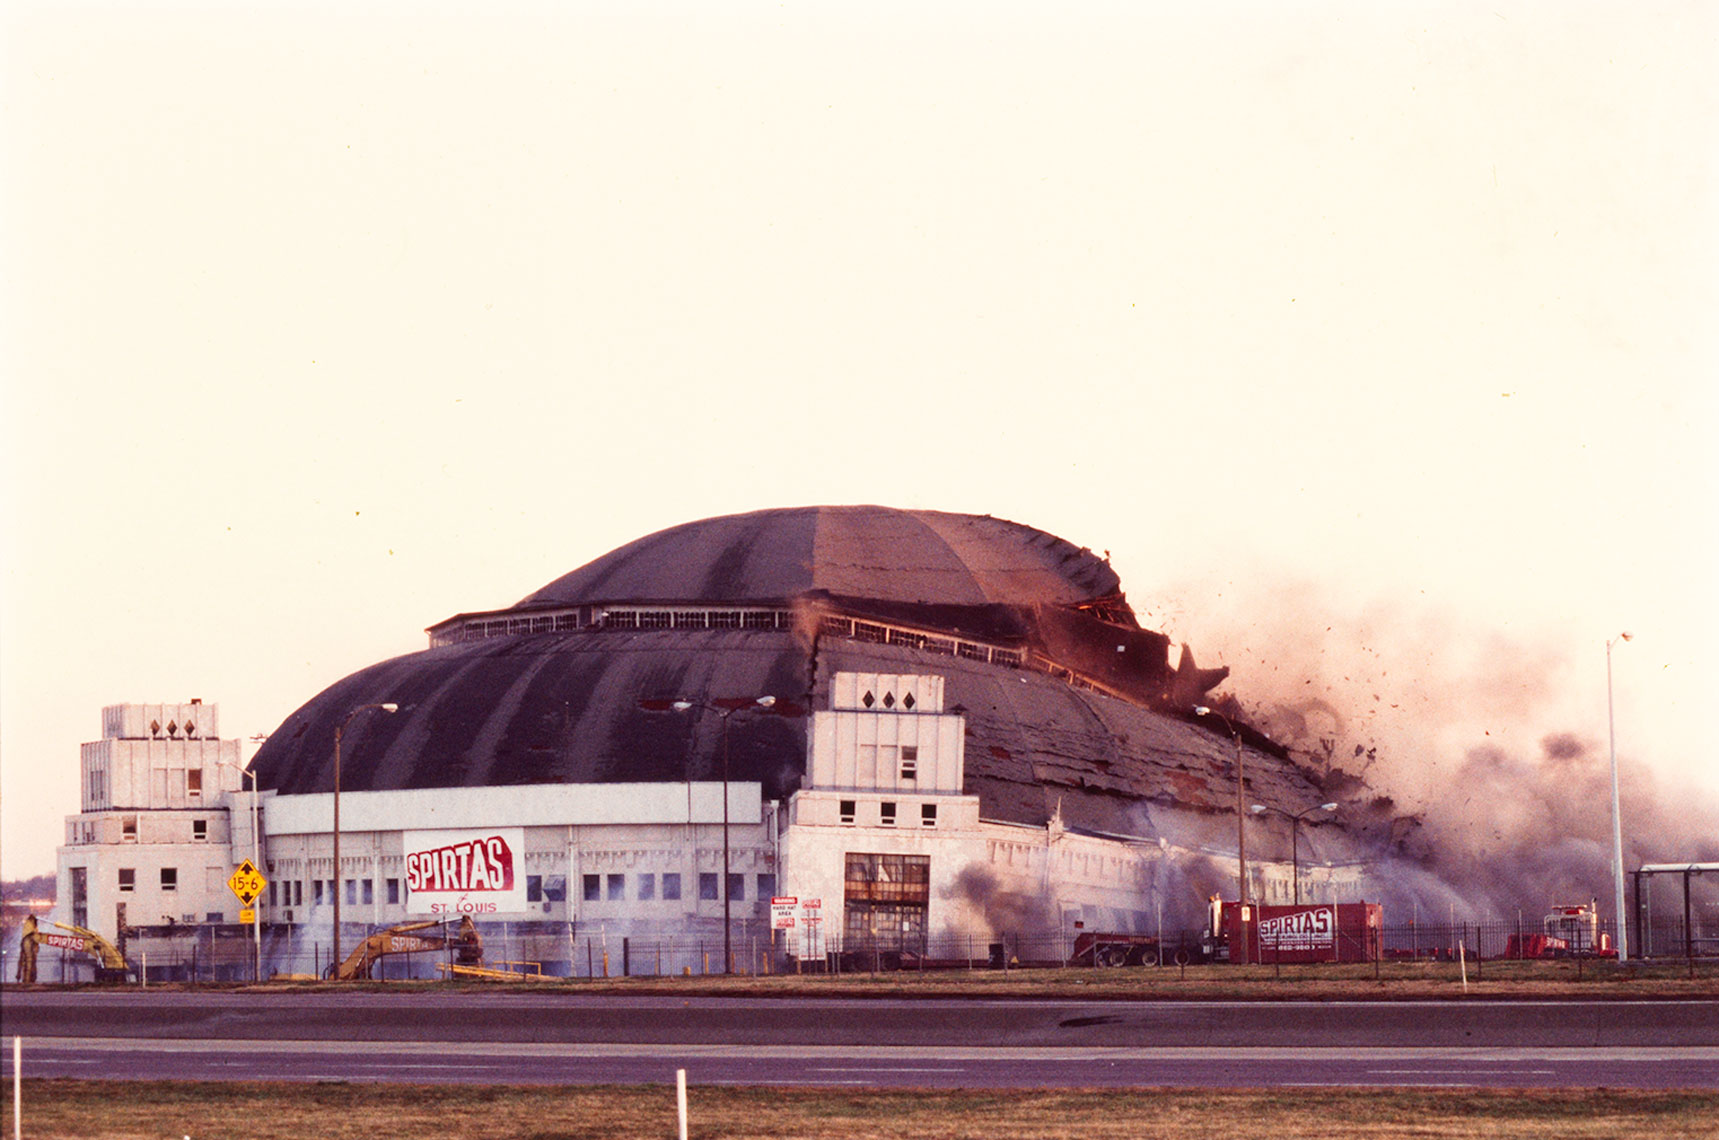 St. Louis arena demolition by controlled implosion, sequence 3